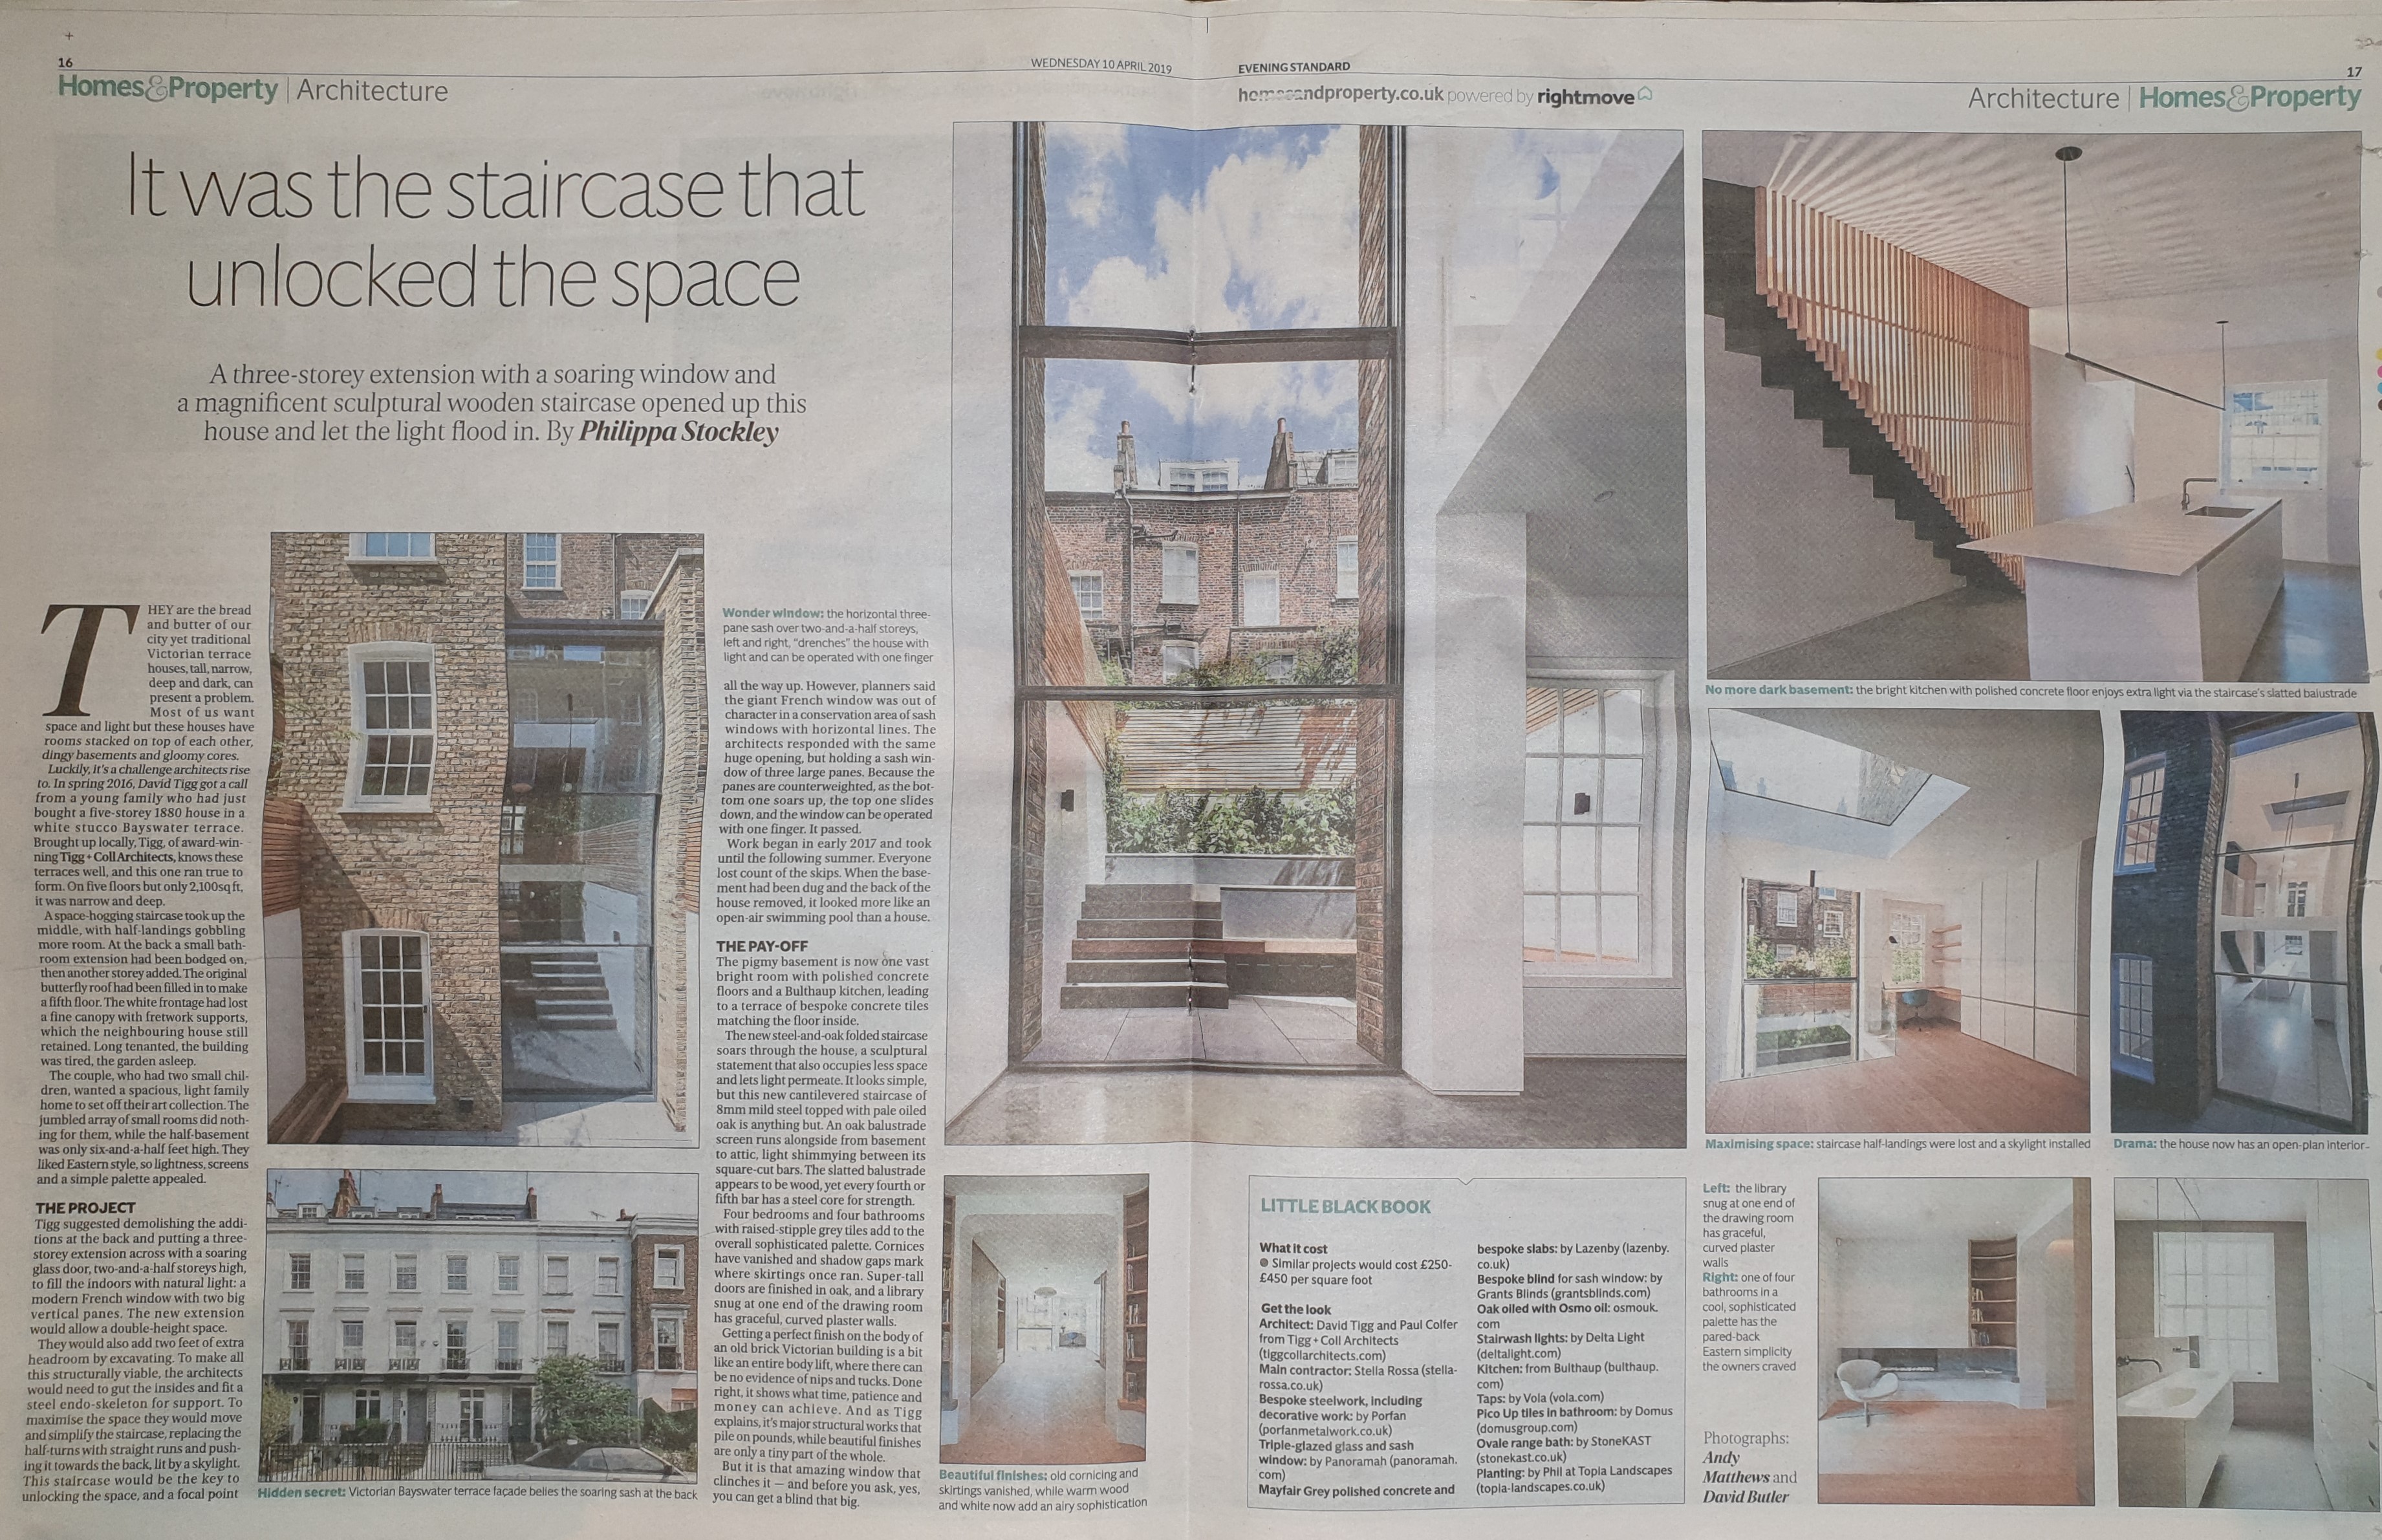 Porfan Metalwork is featured in Evening Standard piece on architecture.